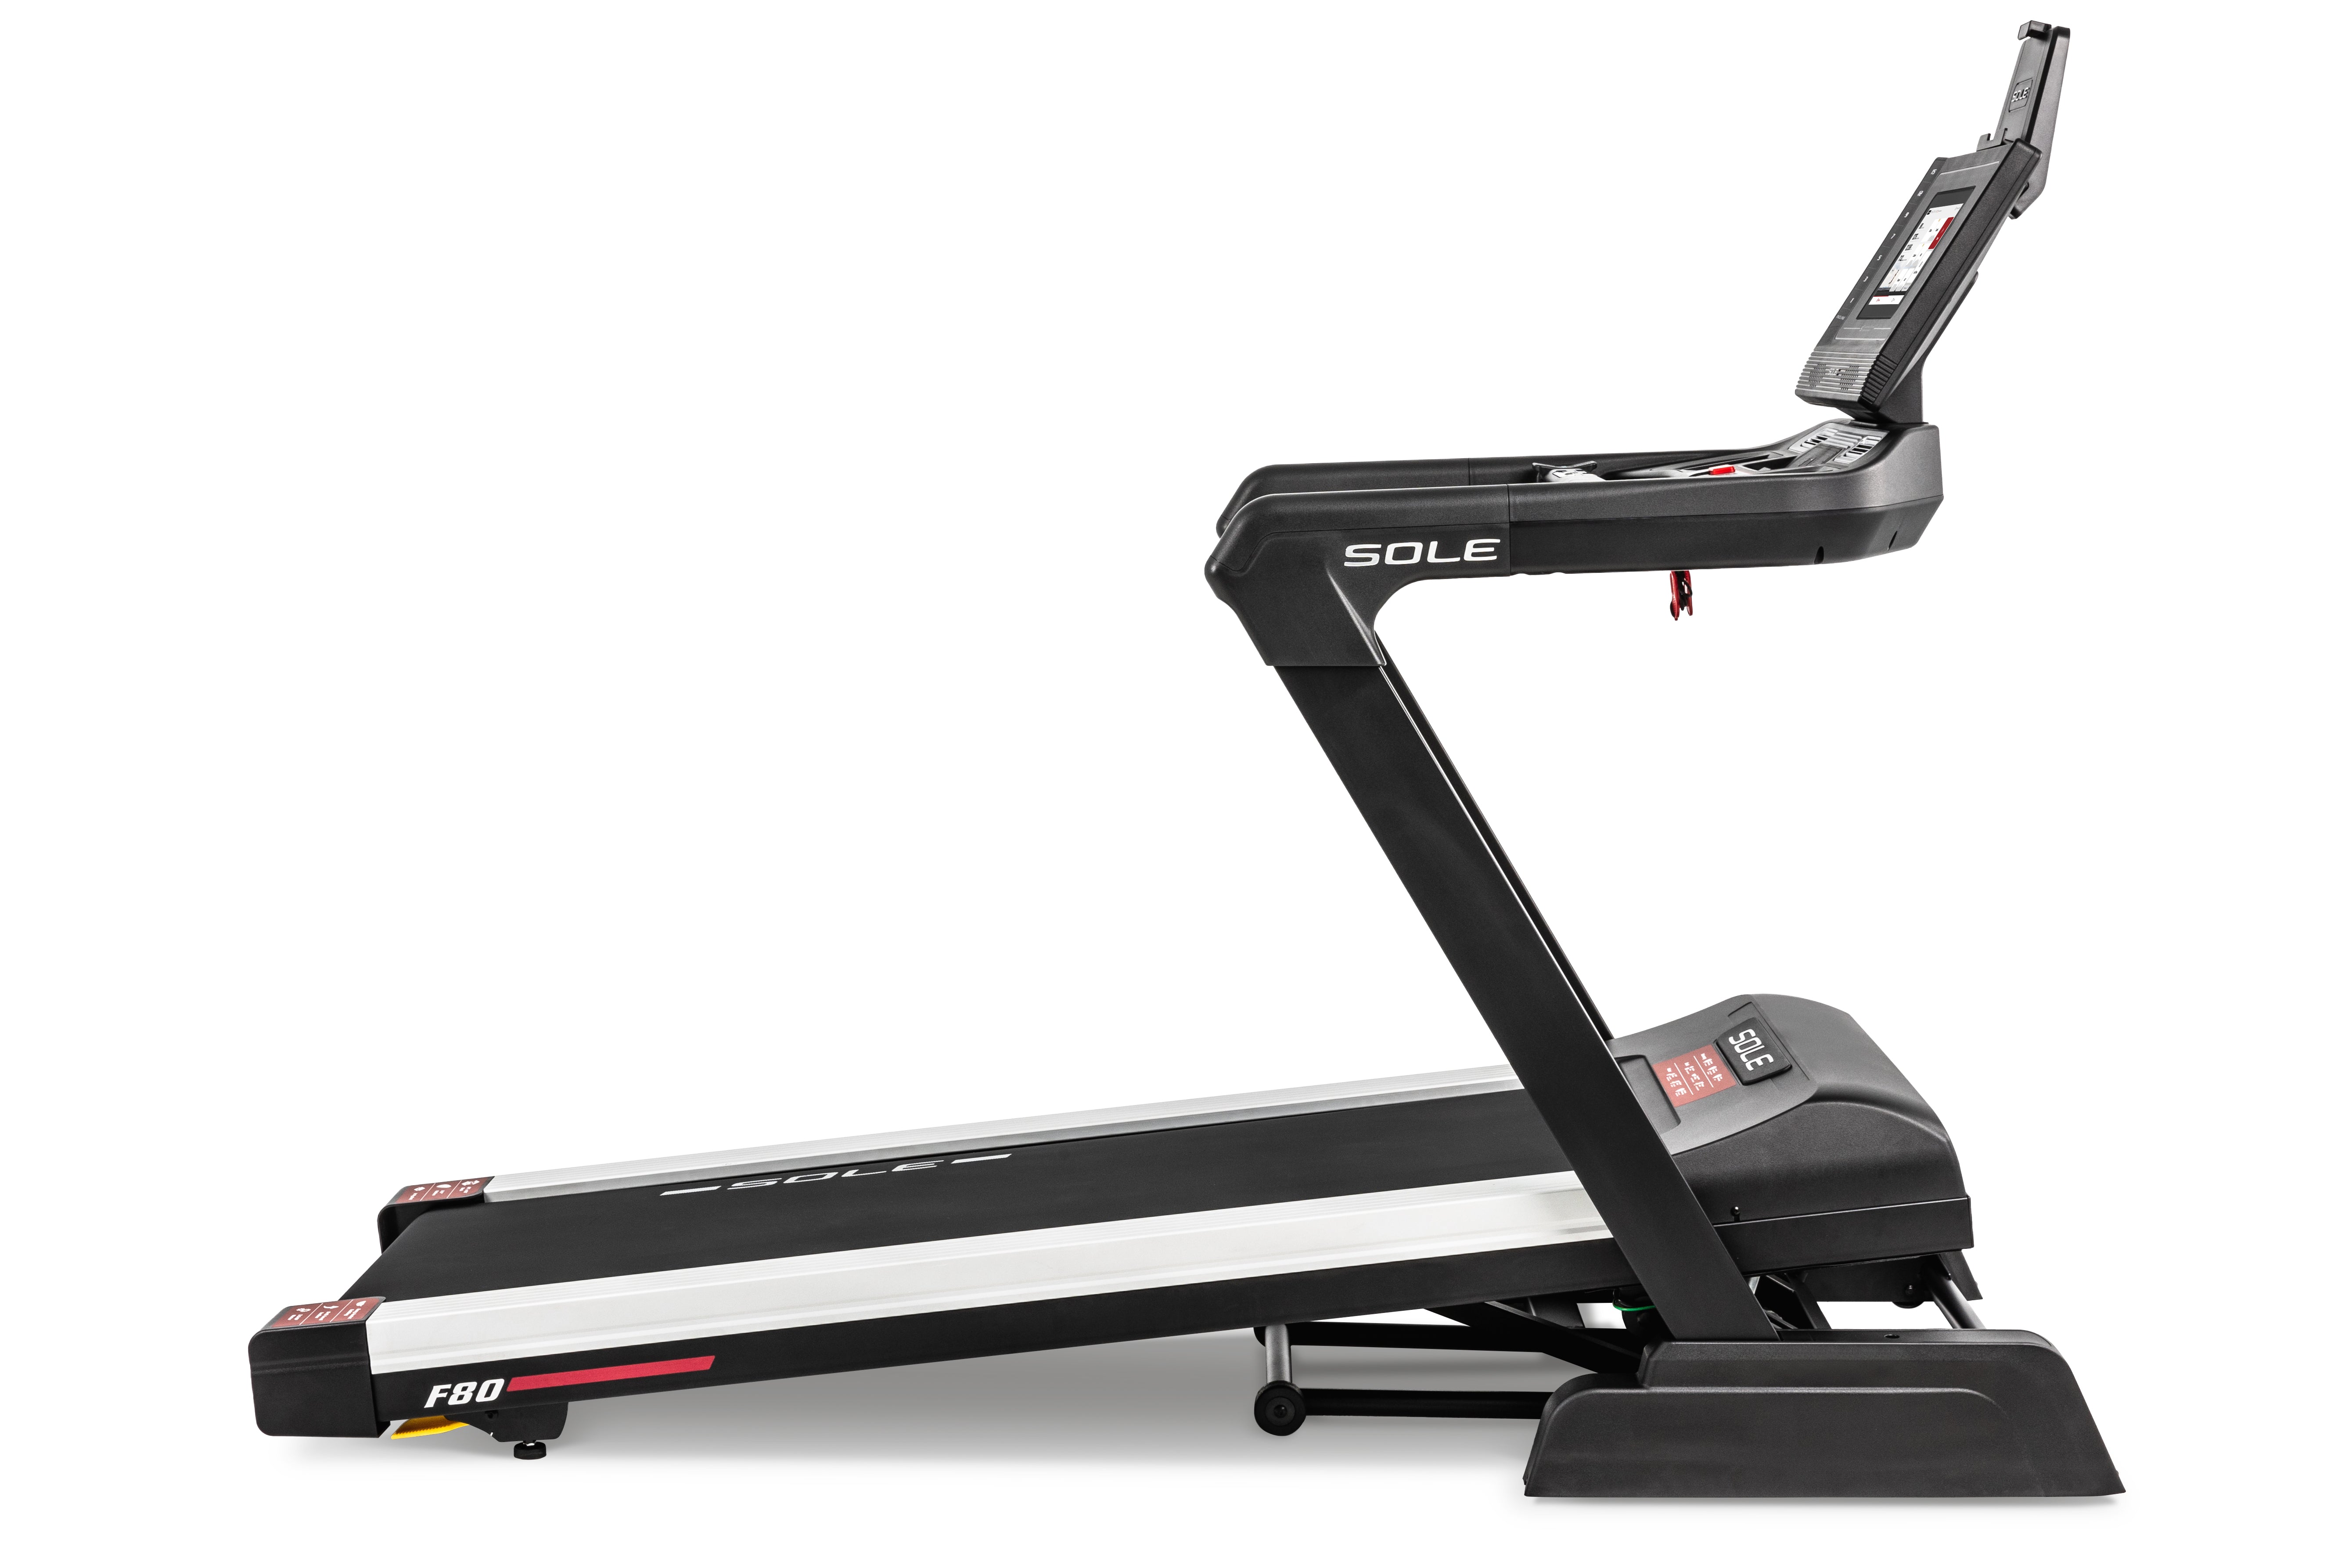 Sole F80 Treadmill side view with running surface inclined highest.